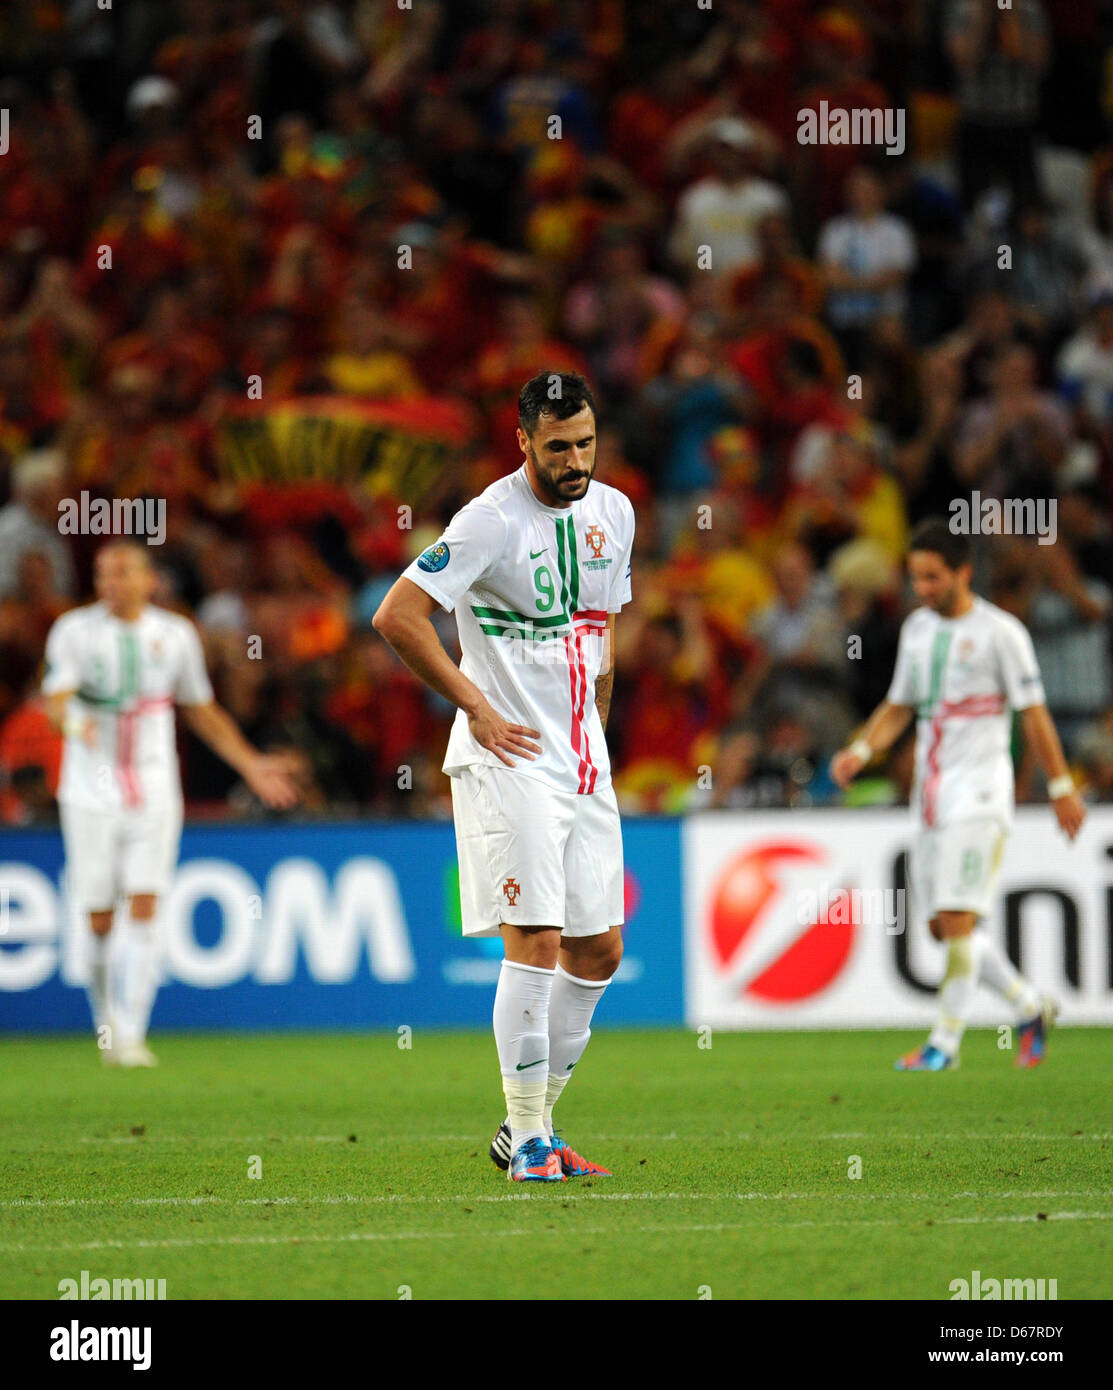 Portugal's Hugo Almeida reacts during the UEFA EURO 2012 semi-final soccer match Portugal vs Spain at Donbass Arena in Donetsk, Ukraine, 27 June 2012. Photo: Thomas Eisenhuth dpa (Please refer to chapters 7 and 8 of http://dpaq.de/Ziovh for UEFA Euro 2012 Terms & Conditions) Stock Photo